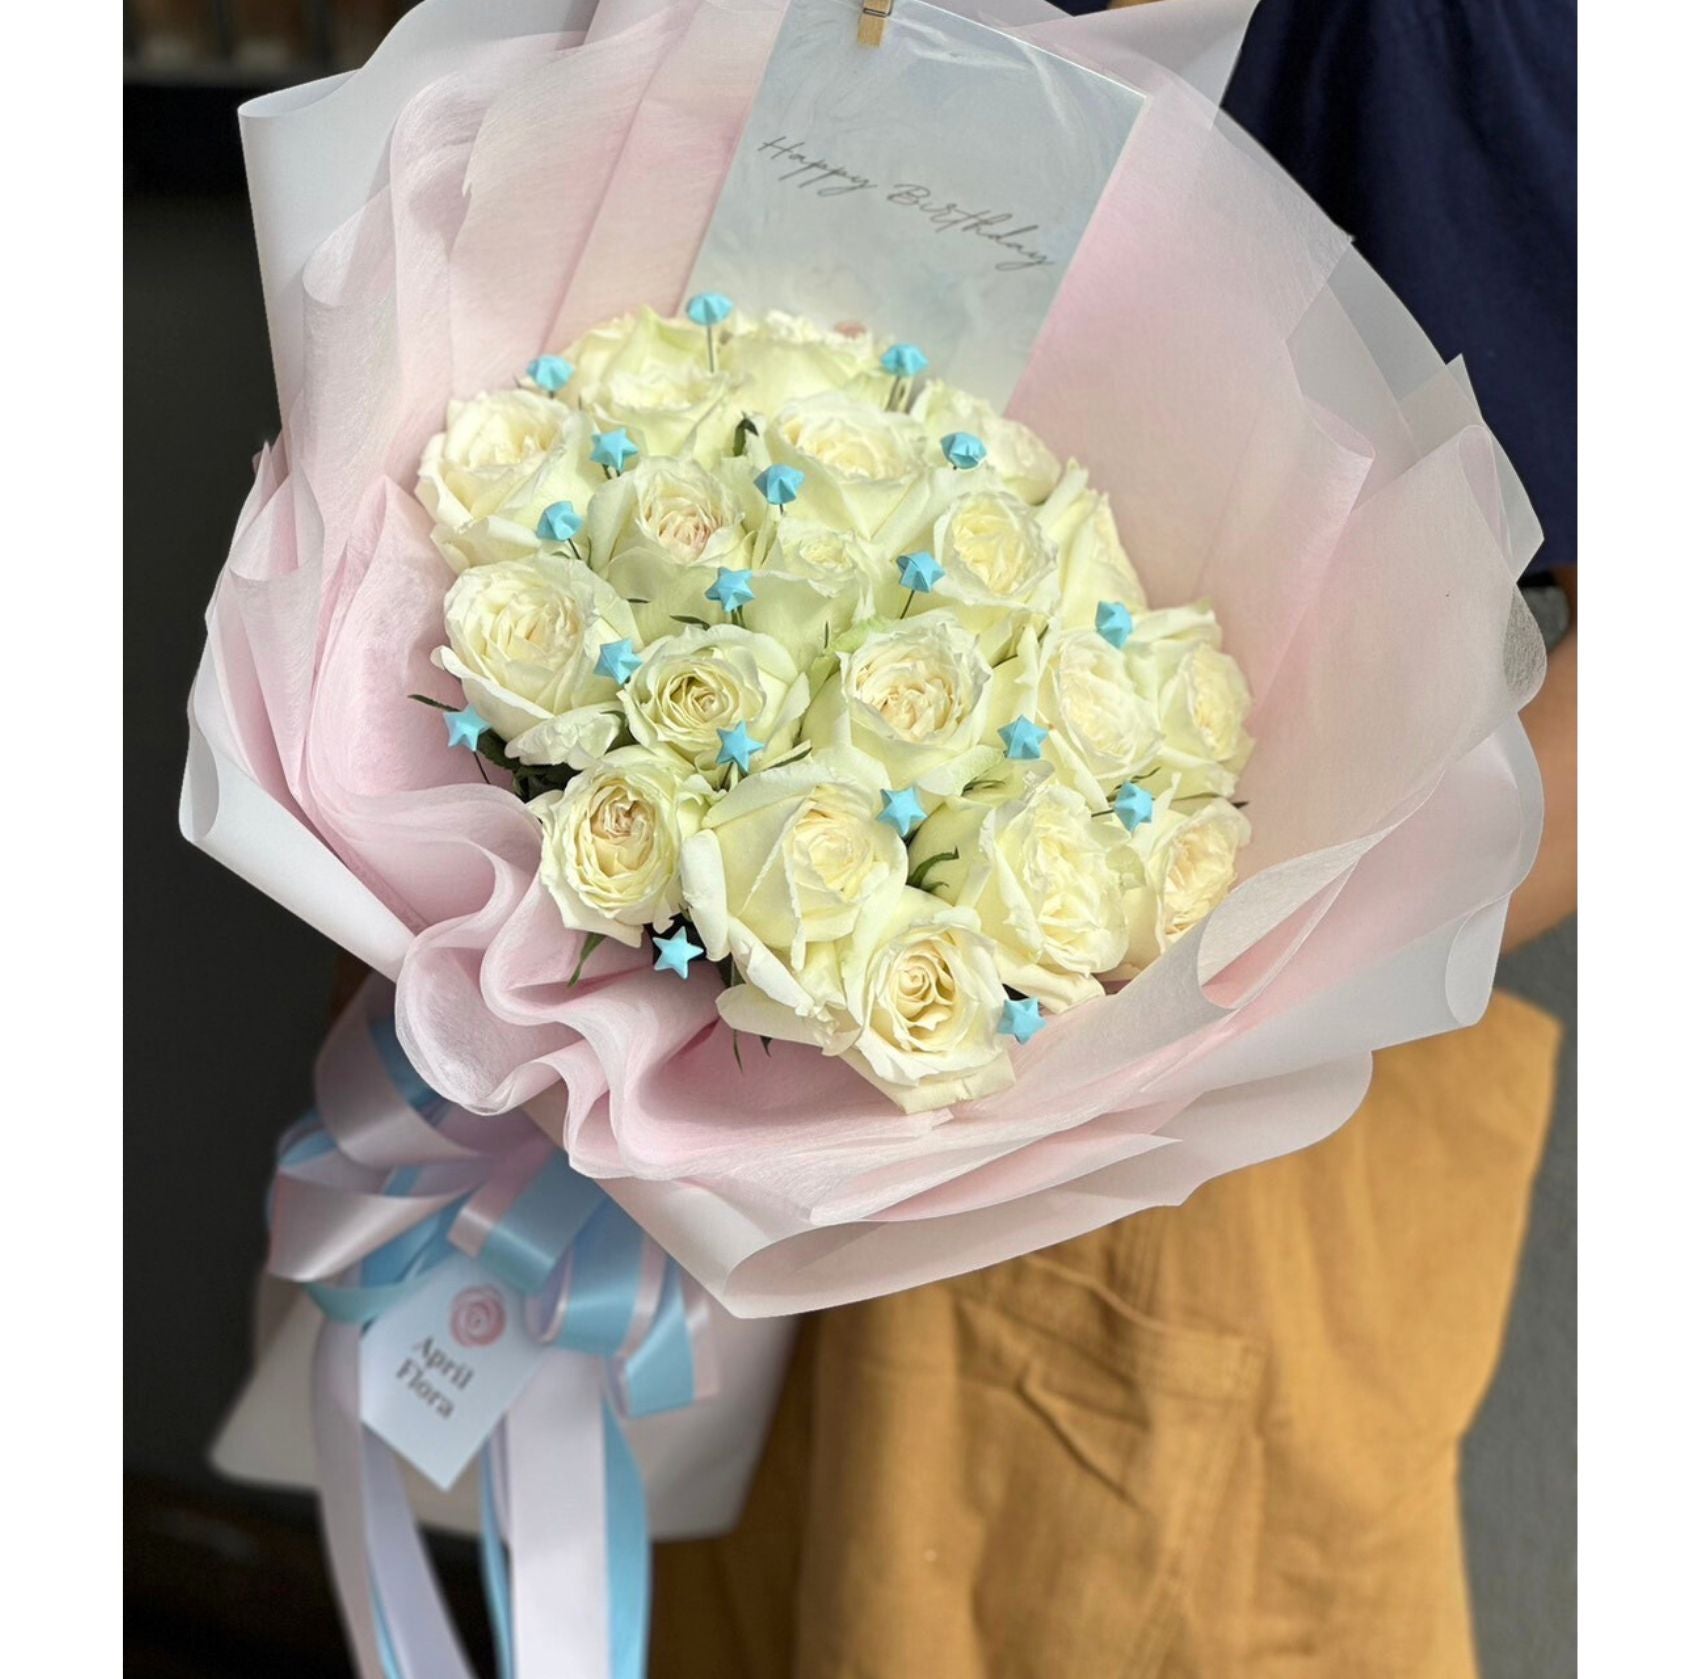 "My North Star" Bouquet Of 20 Roses